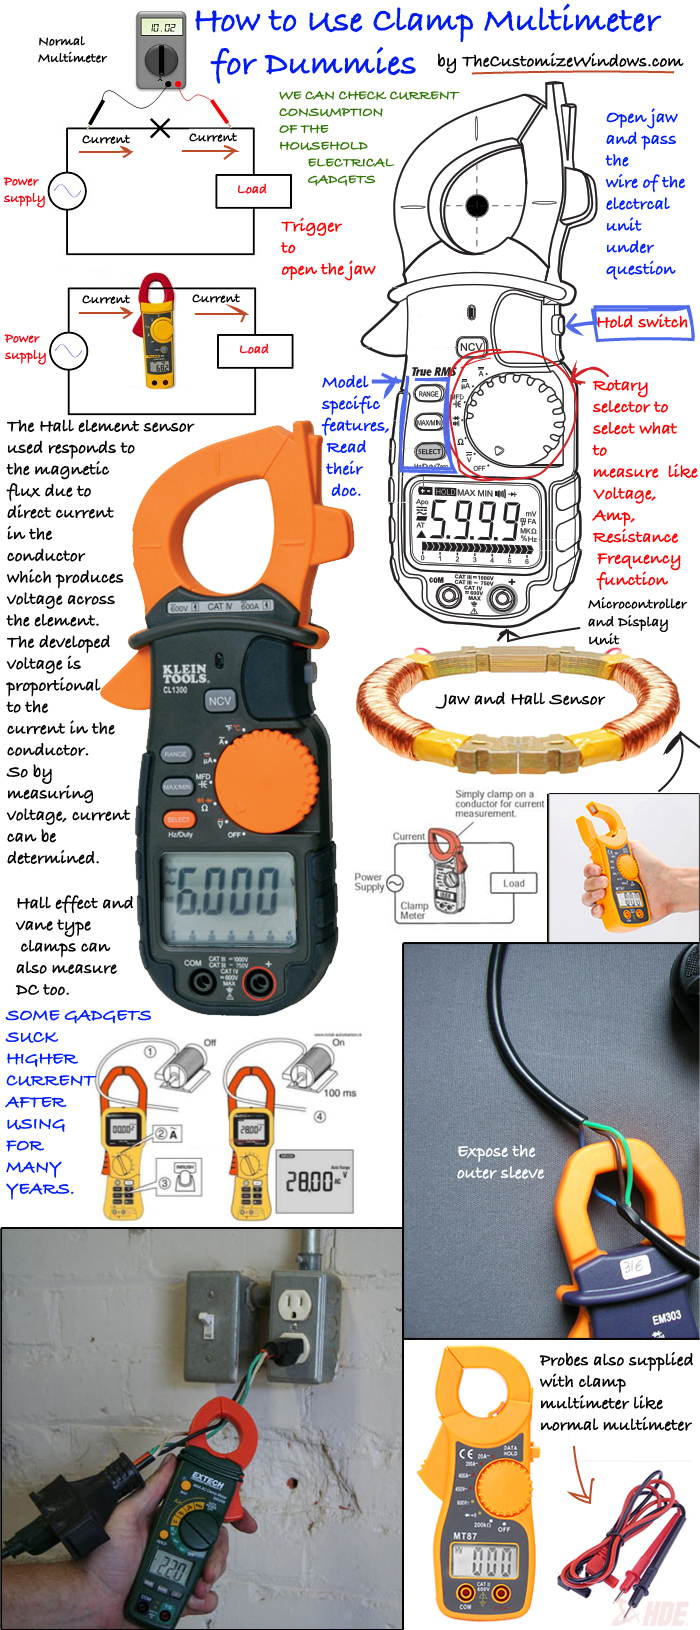 Clamp-Multimeter-How-To-Use-For-Dummies